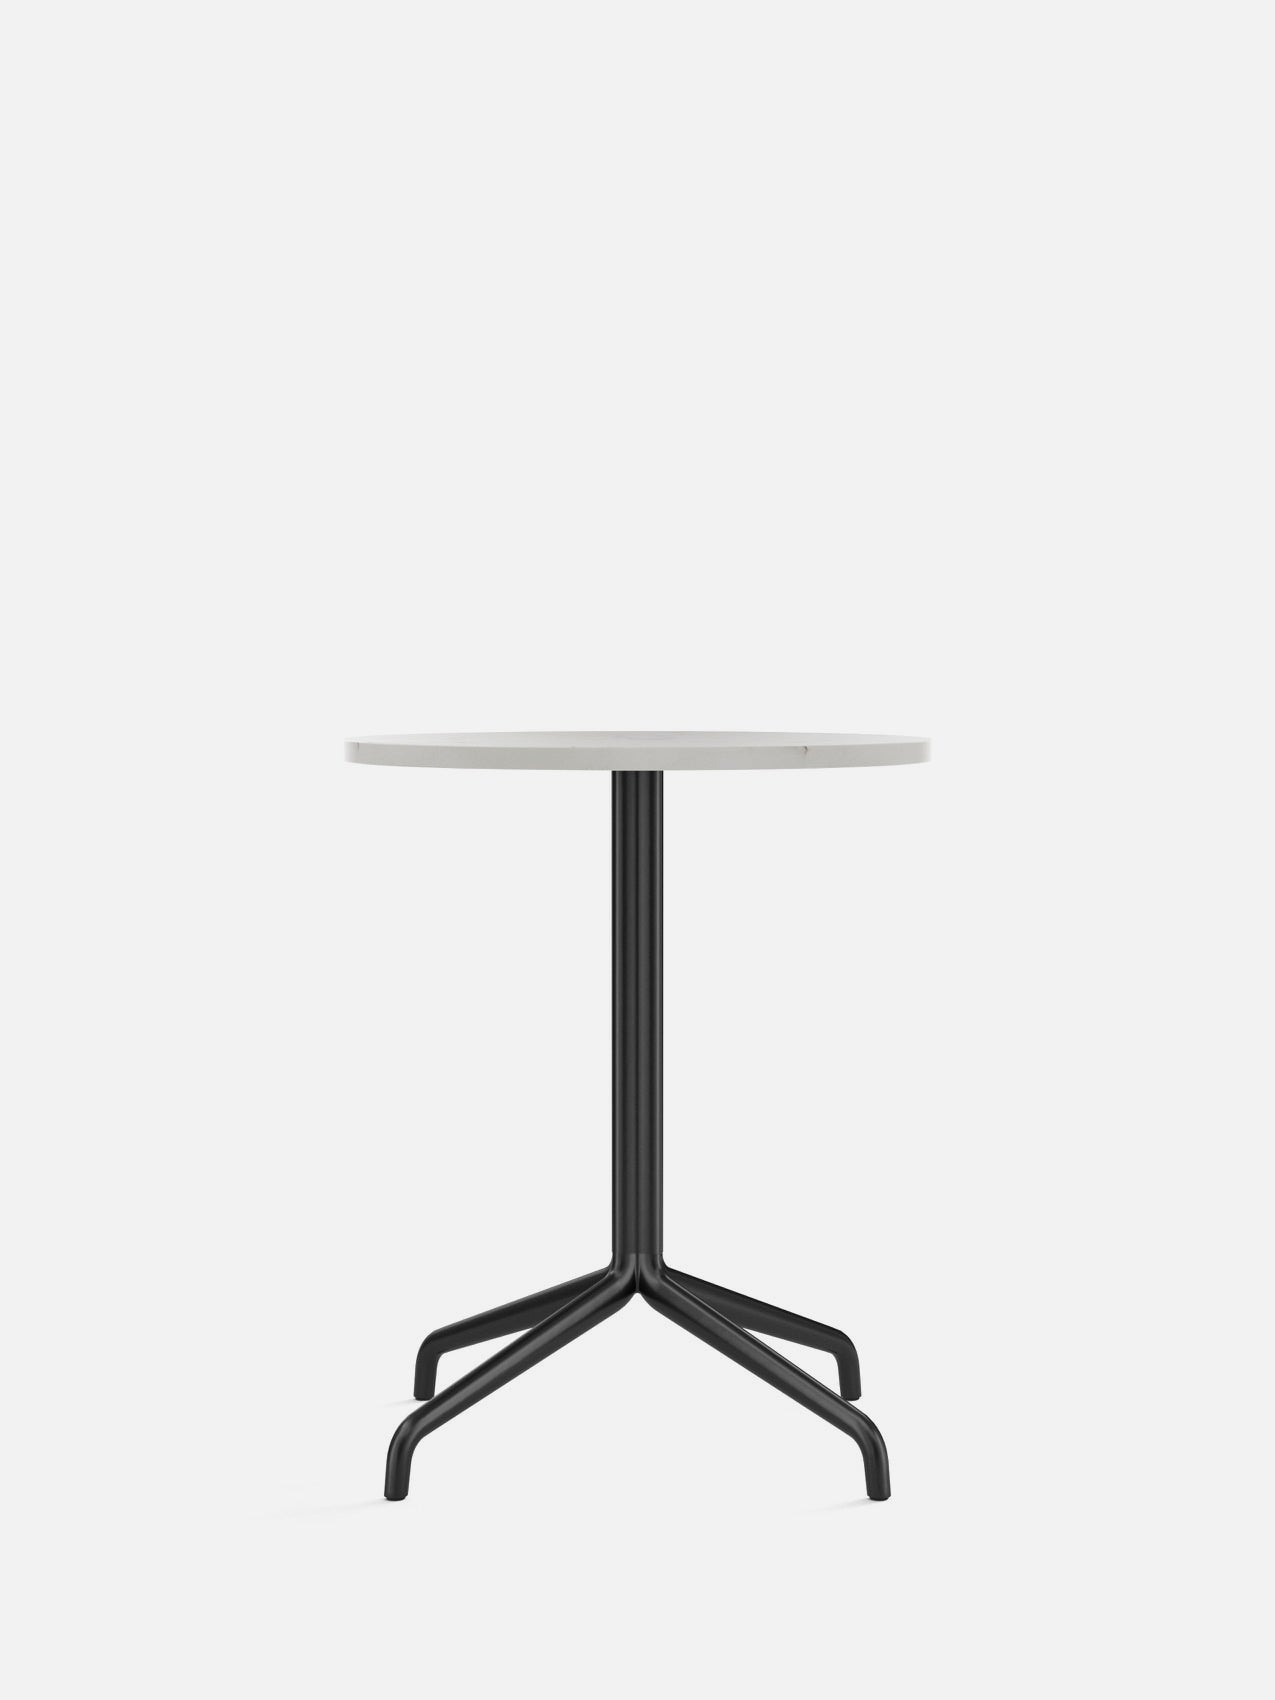 Harbour Column Table, Round Table Top-Café Table-Norm Architects-Dining Height (28.5in) - Star Base-Round 24in - Off White Marble-menu-minimalist-modern-danish-design-home-decor